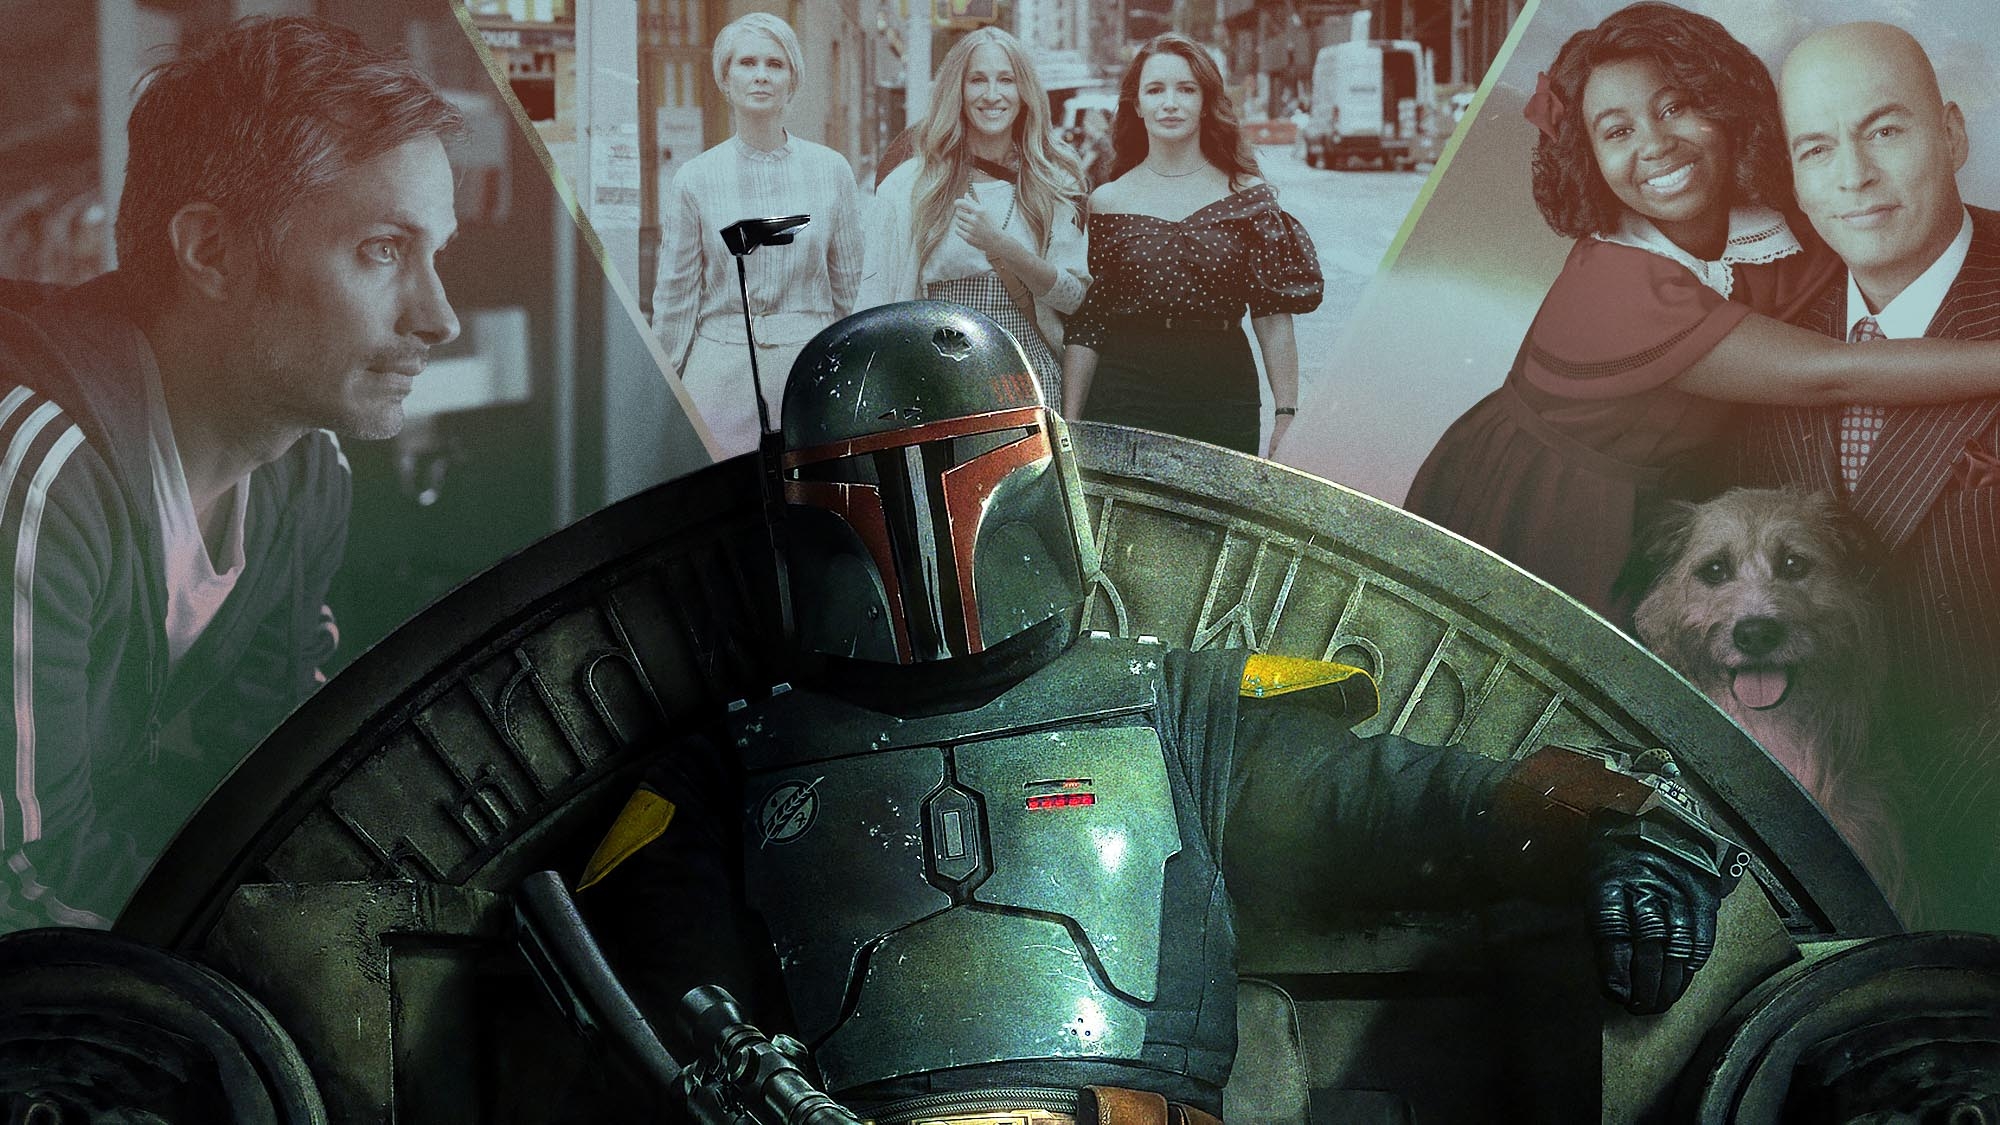 The Book Of Boba Fett and Station Eleven lead December’s TV premieres